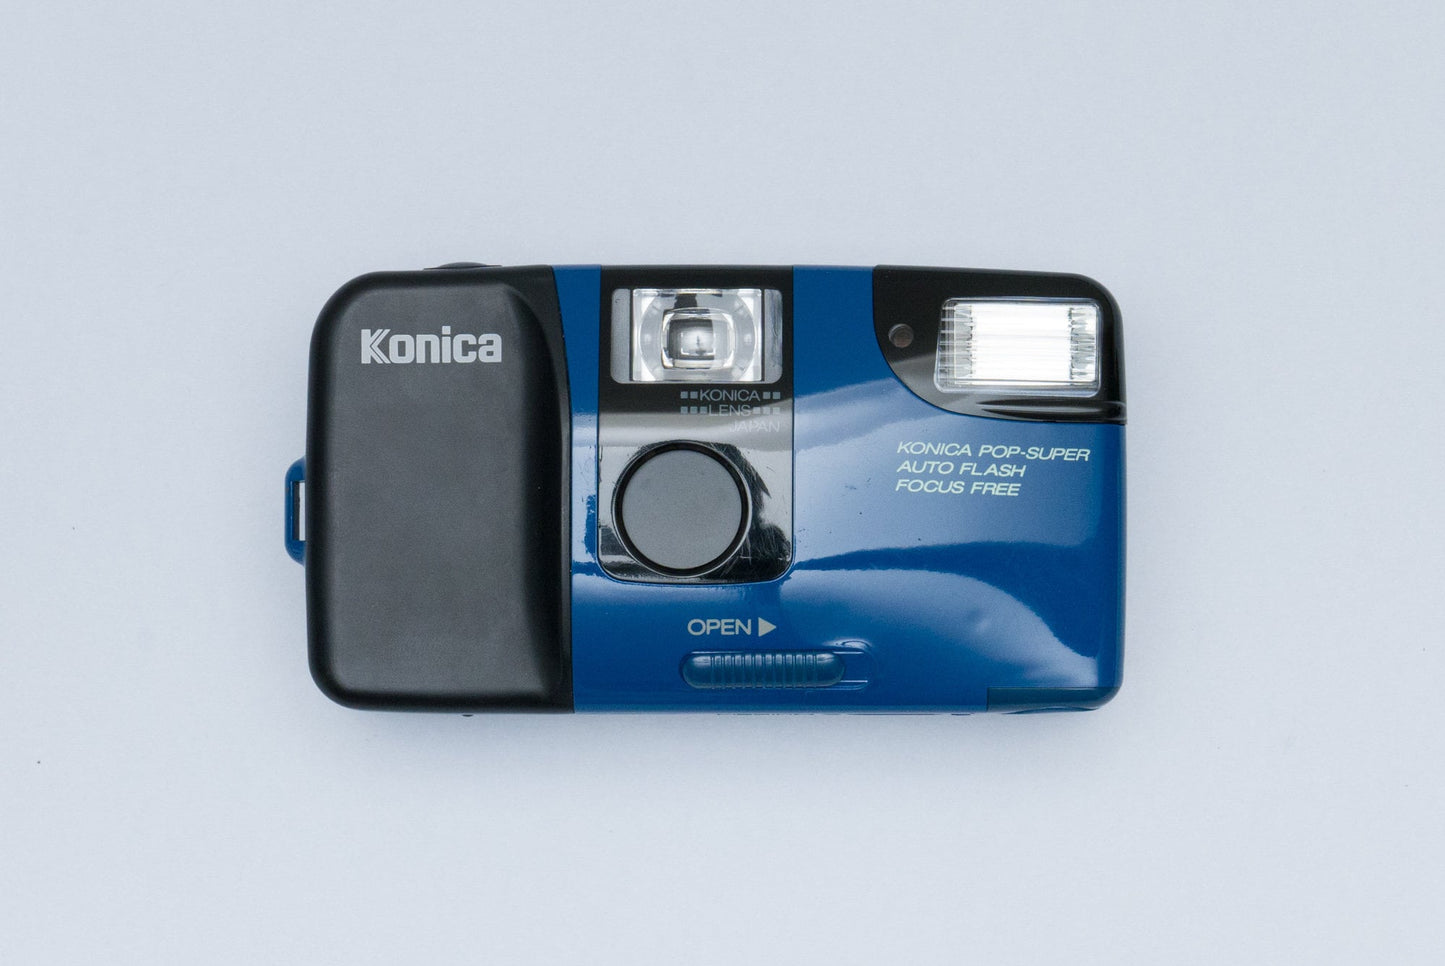 Konica POP-Super 35mm Compact Point and Shoot Film Camera